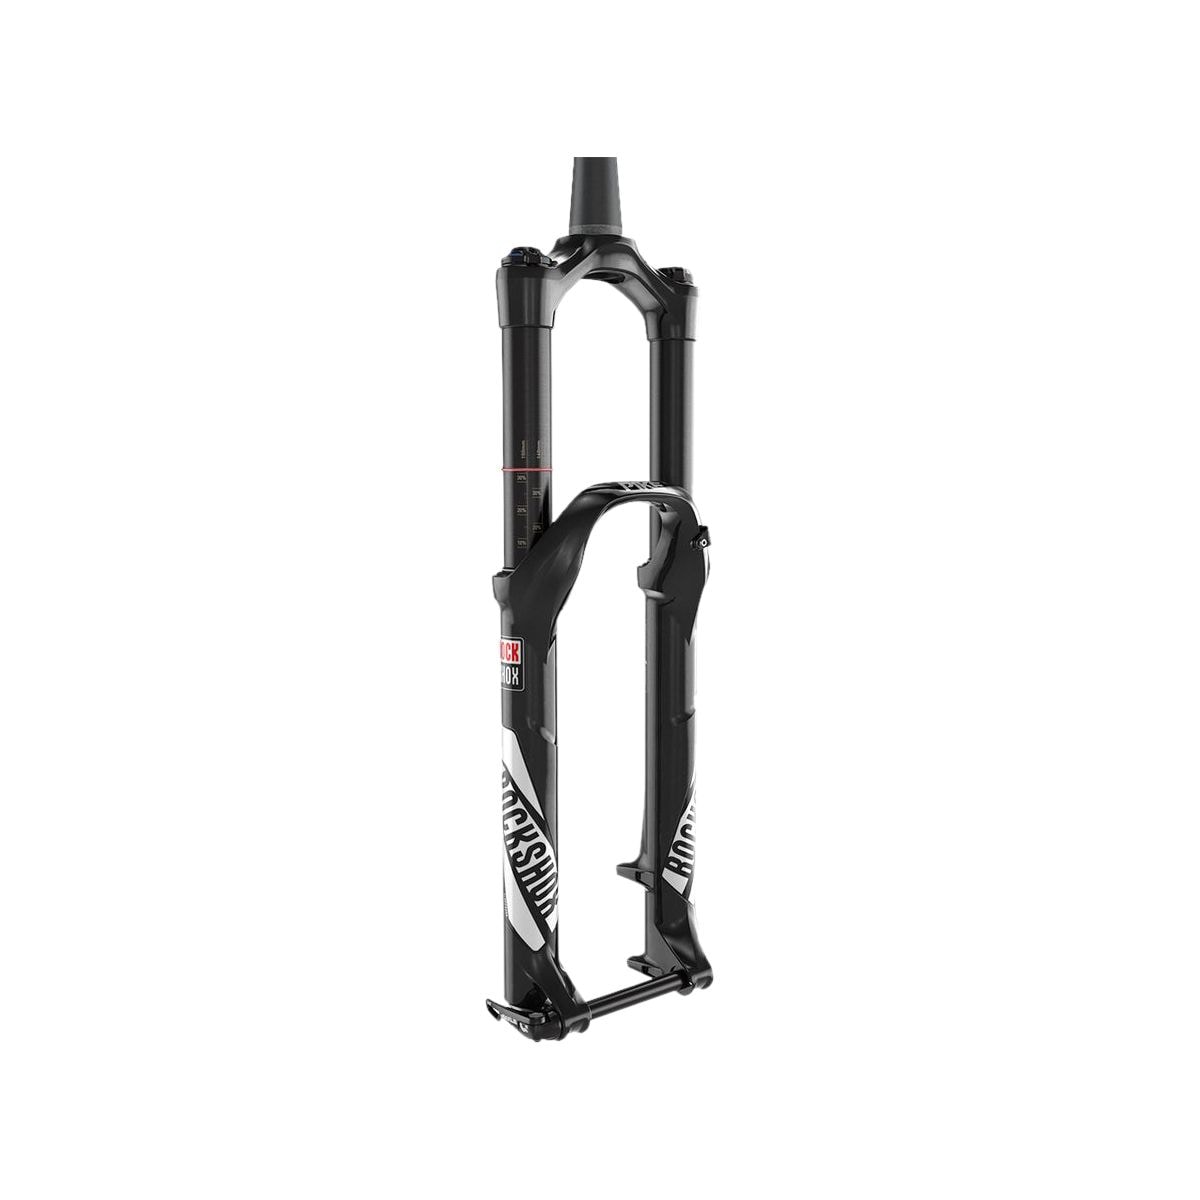 RockShox Pike RCT3 Solo Air 130 Fork 27.5in